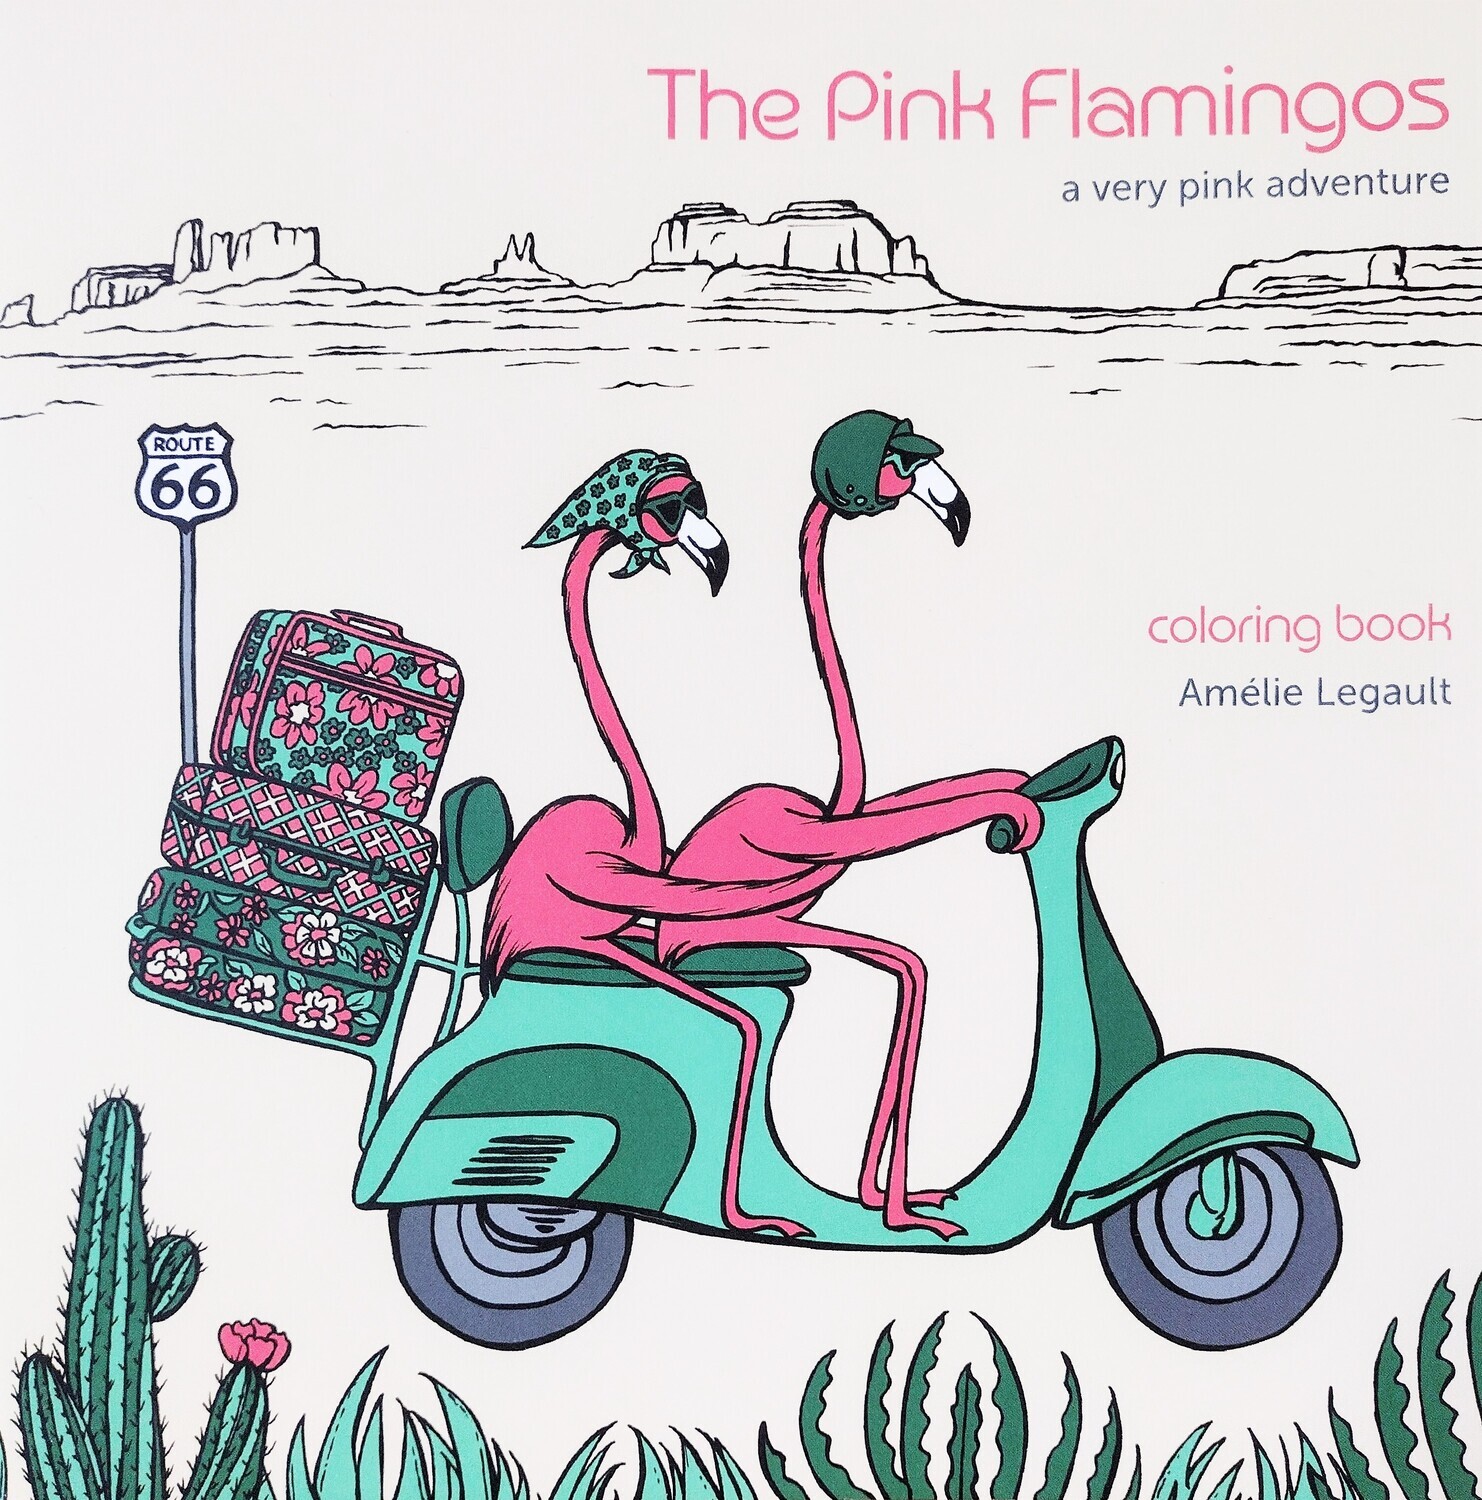 The Pink Flamingos - Coloring Book by Amelie Legault